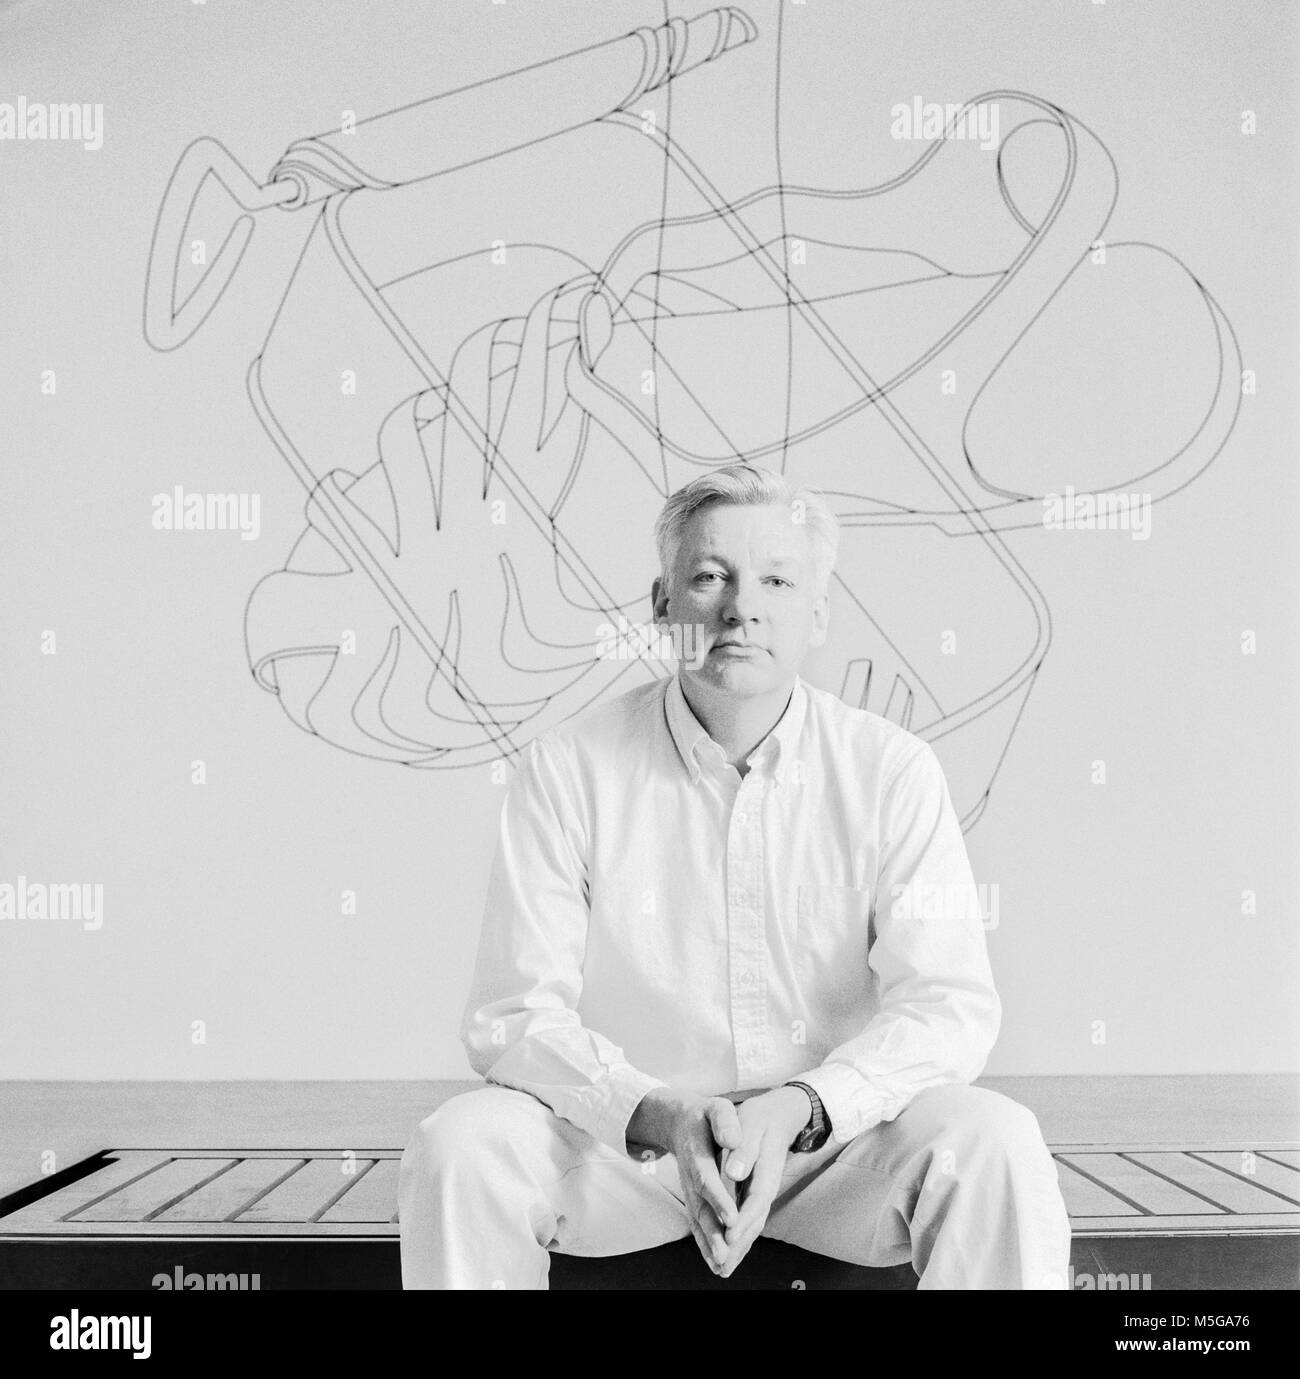 Michael Craig-Martin was born in Dublin Ireland in 1941. He grew up and was educated in the United States, studying Fine Art at the Yale School of Art and Architecture. He has lived and worked in Britain since 1966, archival photograph made on 6 November 1989 at the Whitechapel Gallery Stock Photo